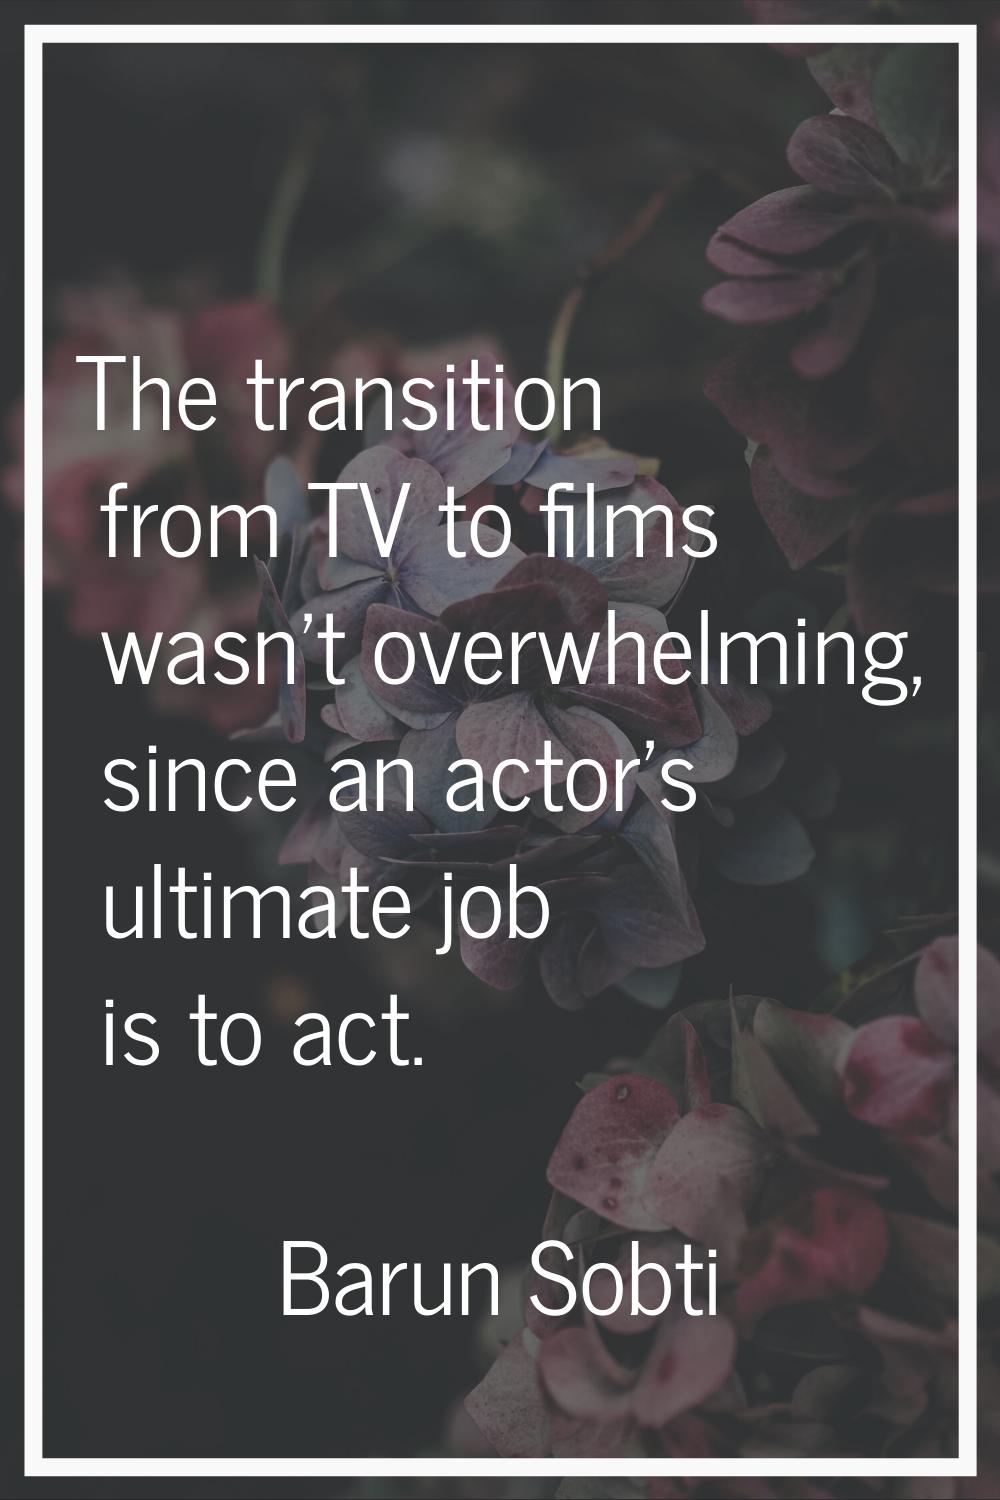 The transition from TV to films wasn't overwhelming, since an actor's ultimate job is to act.